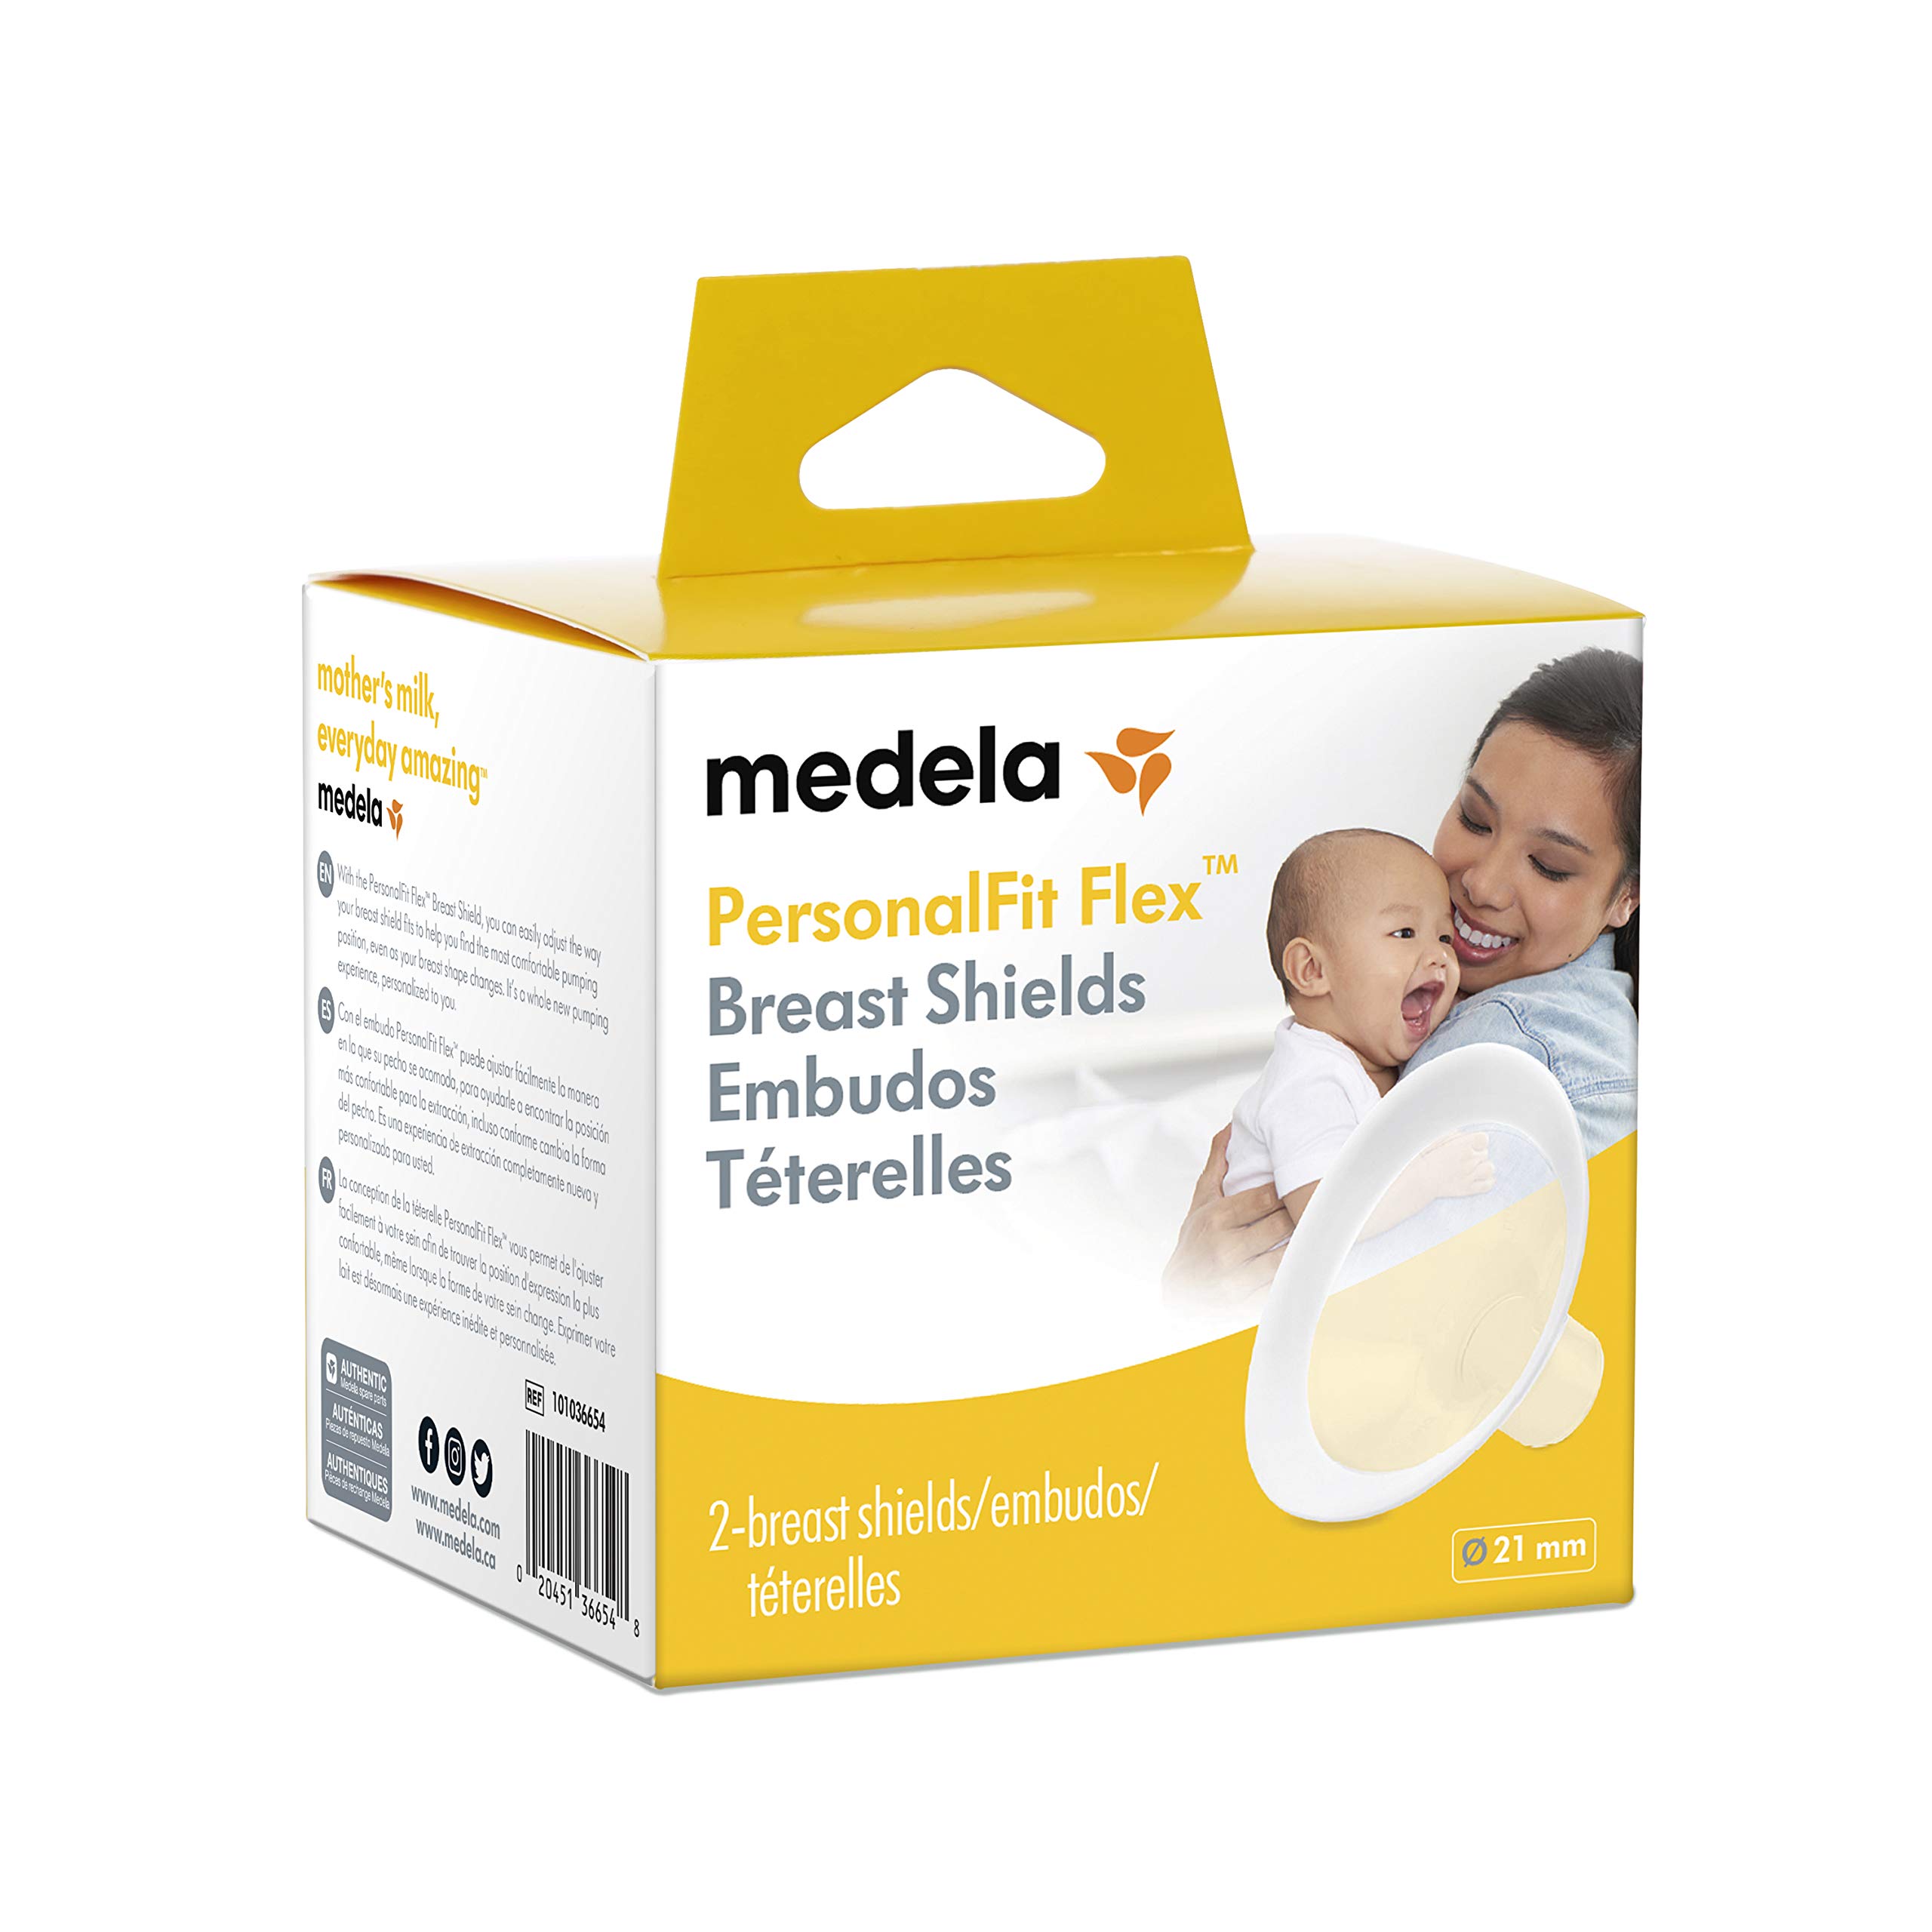 Medela PersonalFit Flex Breast Shields, 2 Pack of Small 21mm Breast Pump Flanges, Made Without BPA, Shaped Around You for Comfortable and Efficient Pumping